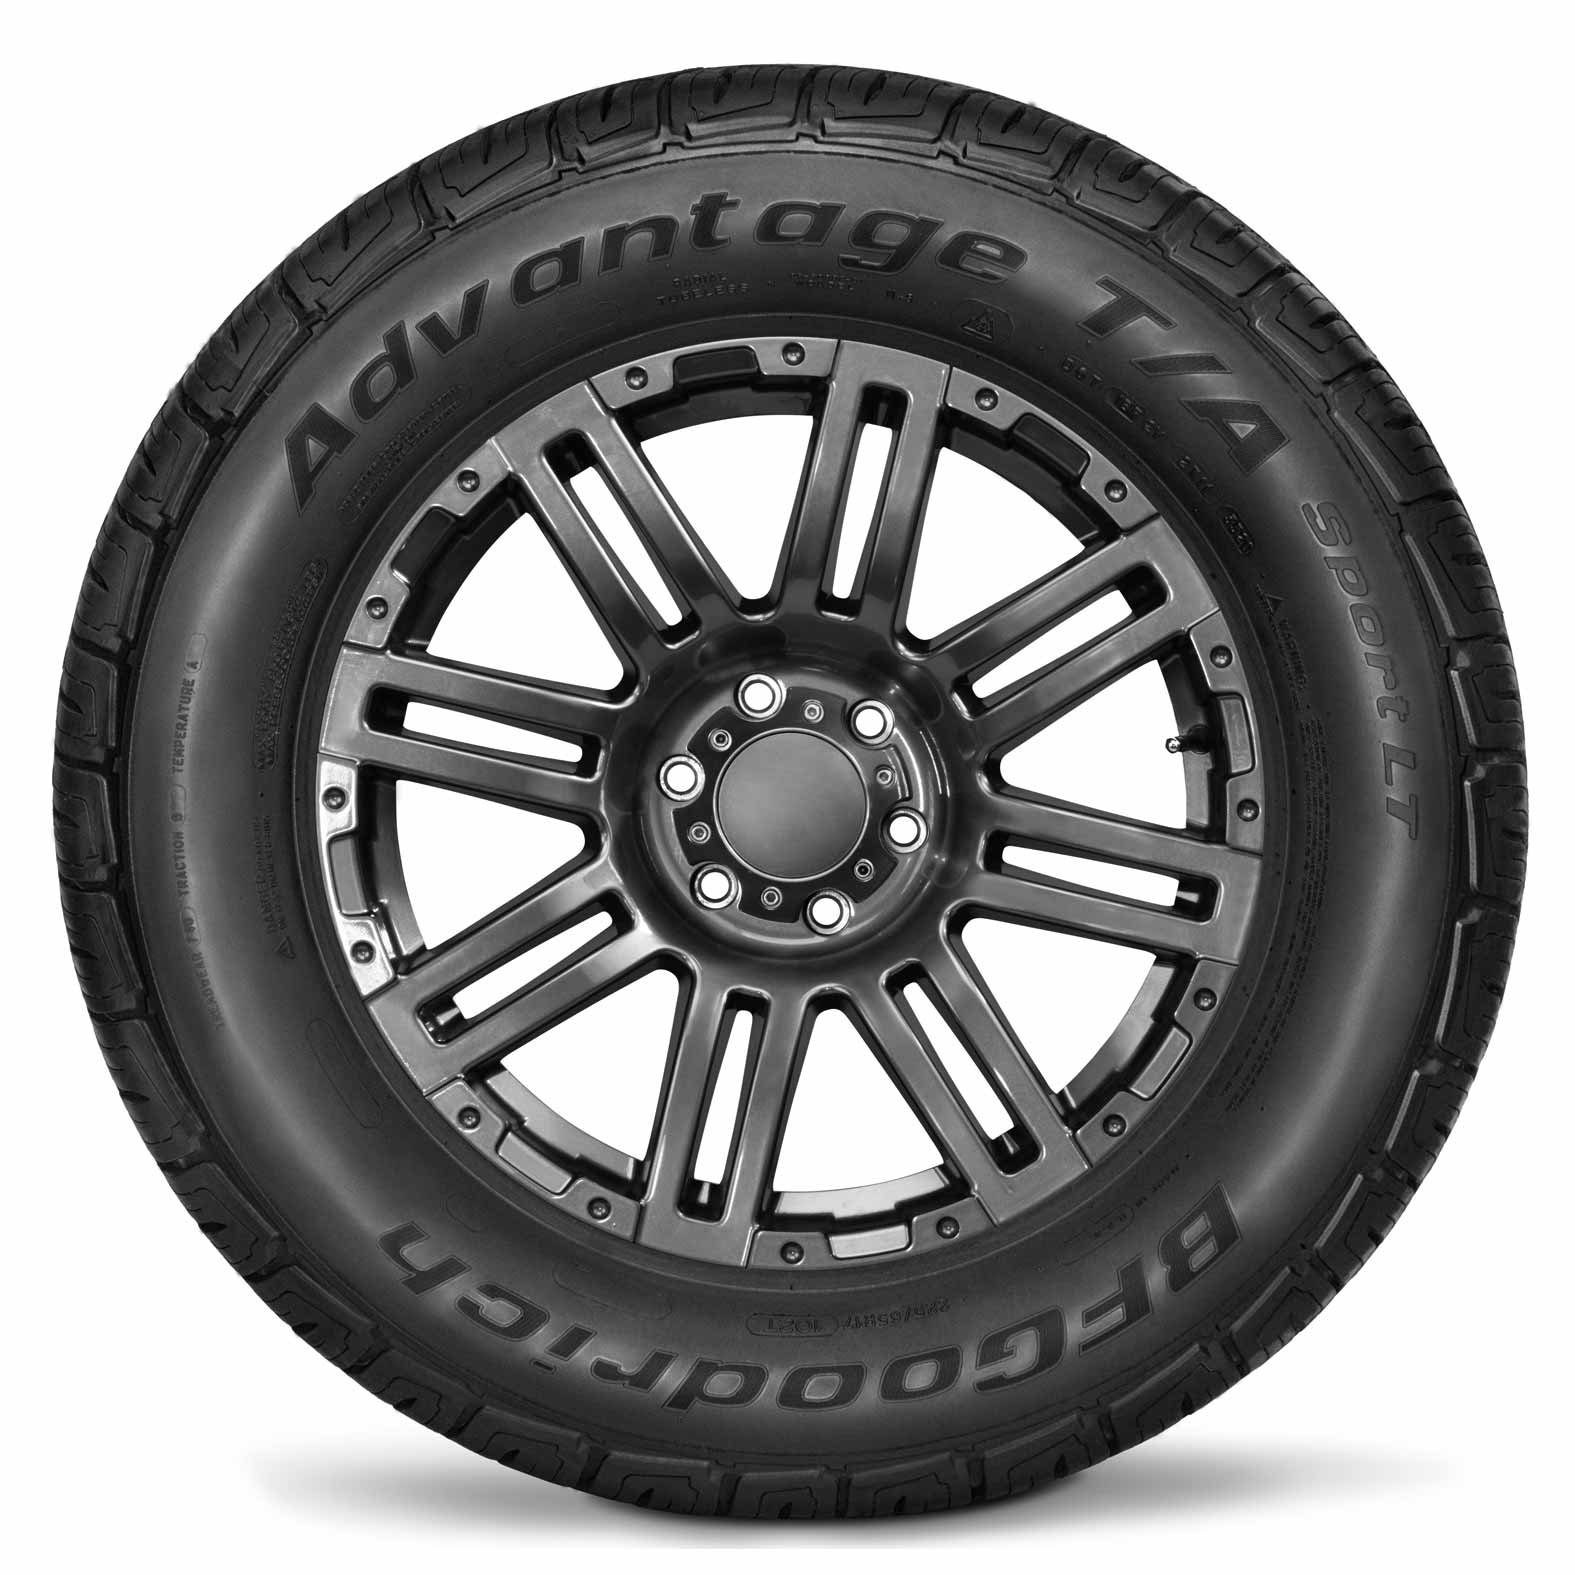 BFGoodrich Advantage T/A Sport LT Tires for All-Weather | Kal Tire